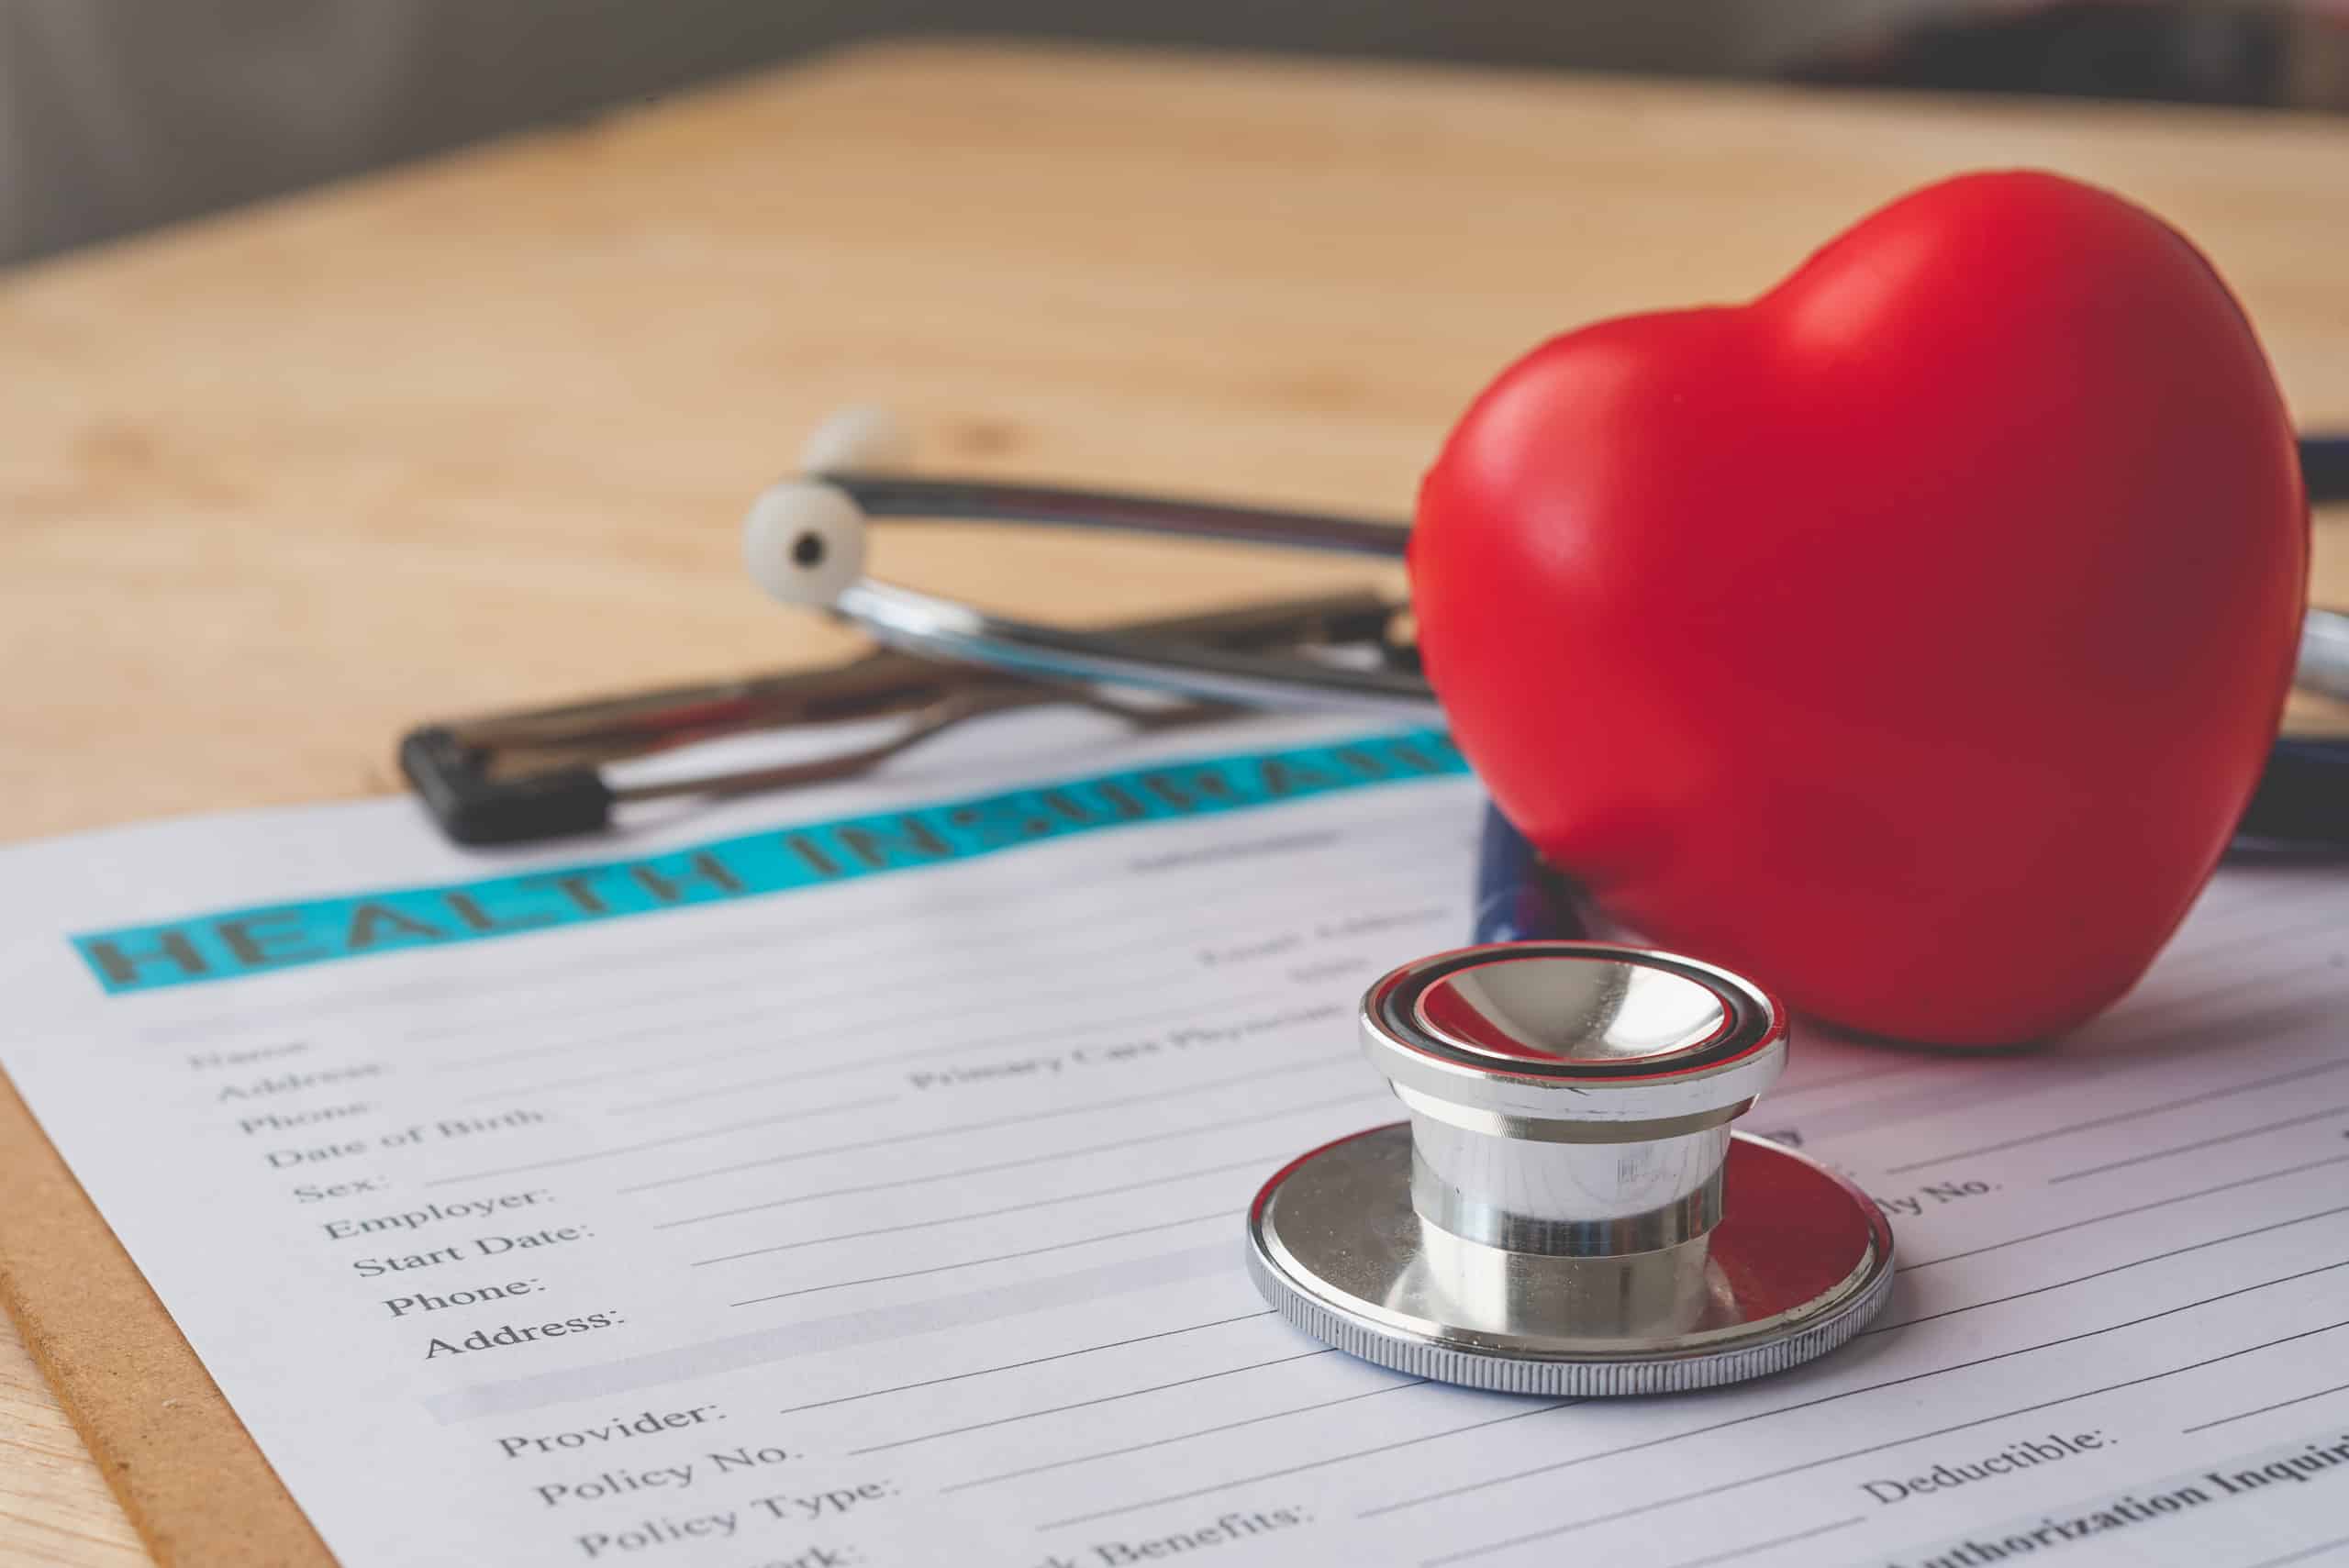 A stethoscope resting on a medical chart with a red heart.